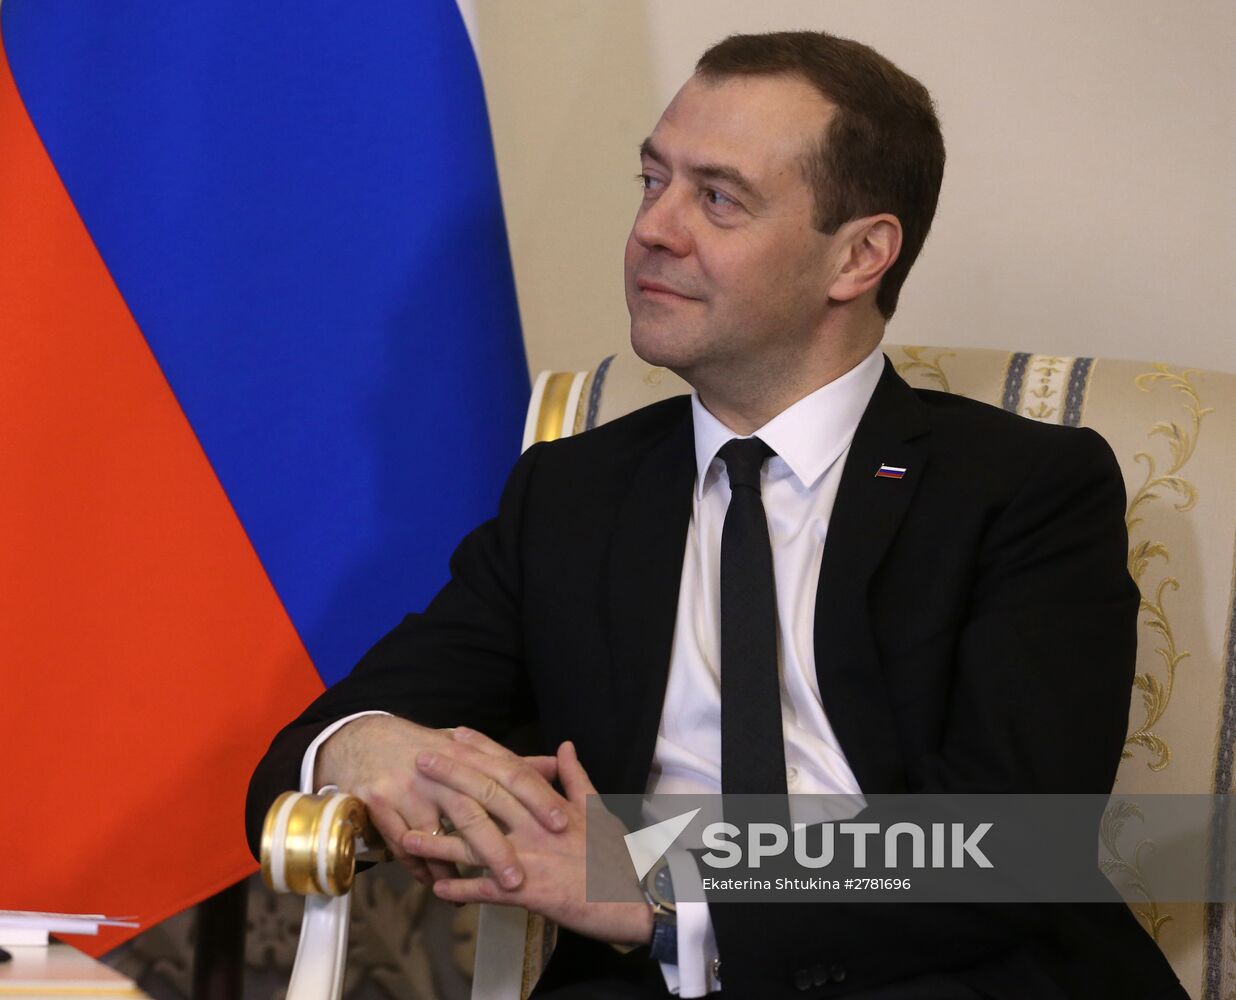 Prime Minister Medvedev meets with Finland's counterpart Juha Sipilä